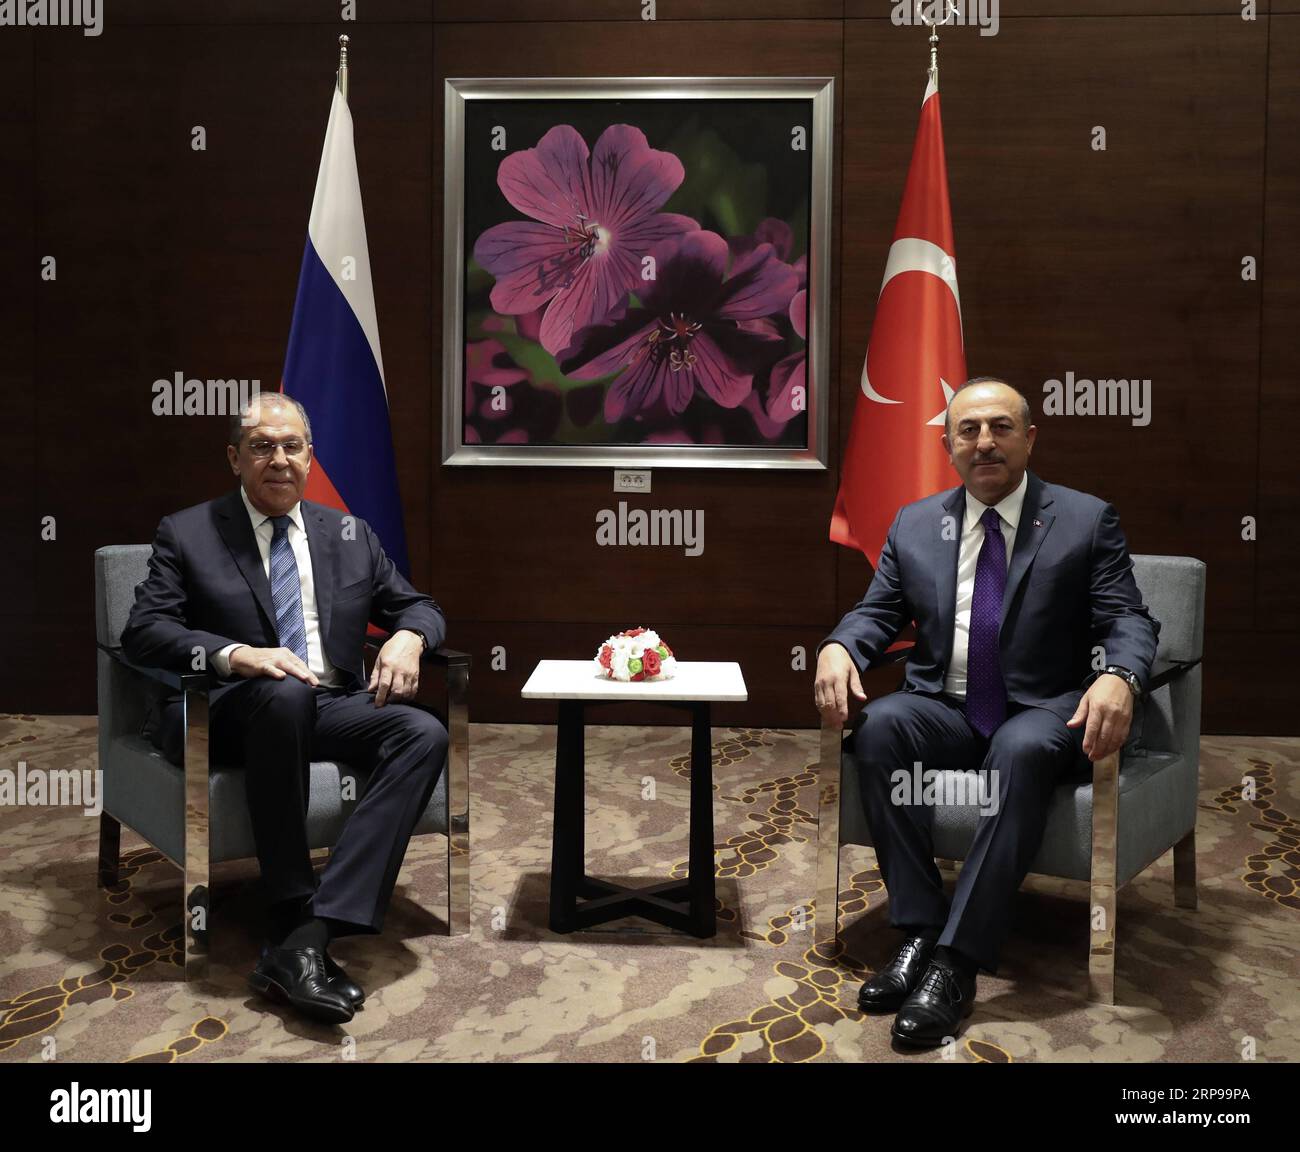 (190329) -- ANTALYA, March 29, 2019 (Xinhua) -- Turkish Foreign Minister Mevlut Cavusoglu (R) meets with his Russian counterpart Sergey Lavrov in Antalya, Turkey, March 29, 2019. Turkey s foreign minister said Friday that the purchase of Russia s S-400 air defense systems is a done deal and refuted claims over possible delivery of these systems to a third country in order to avoid U.S. sanctions. (Xinhua) TURKEY-ANTALYA-FM-RUSSIA-LAVROV-MEETING PUBLICATIONxNOTxINxCHN Stock Photo